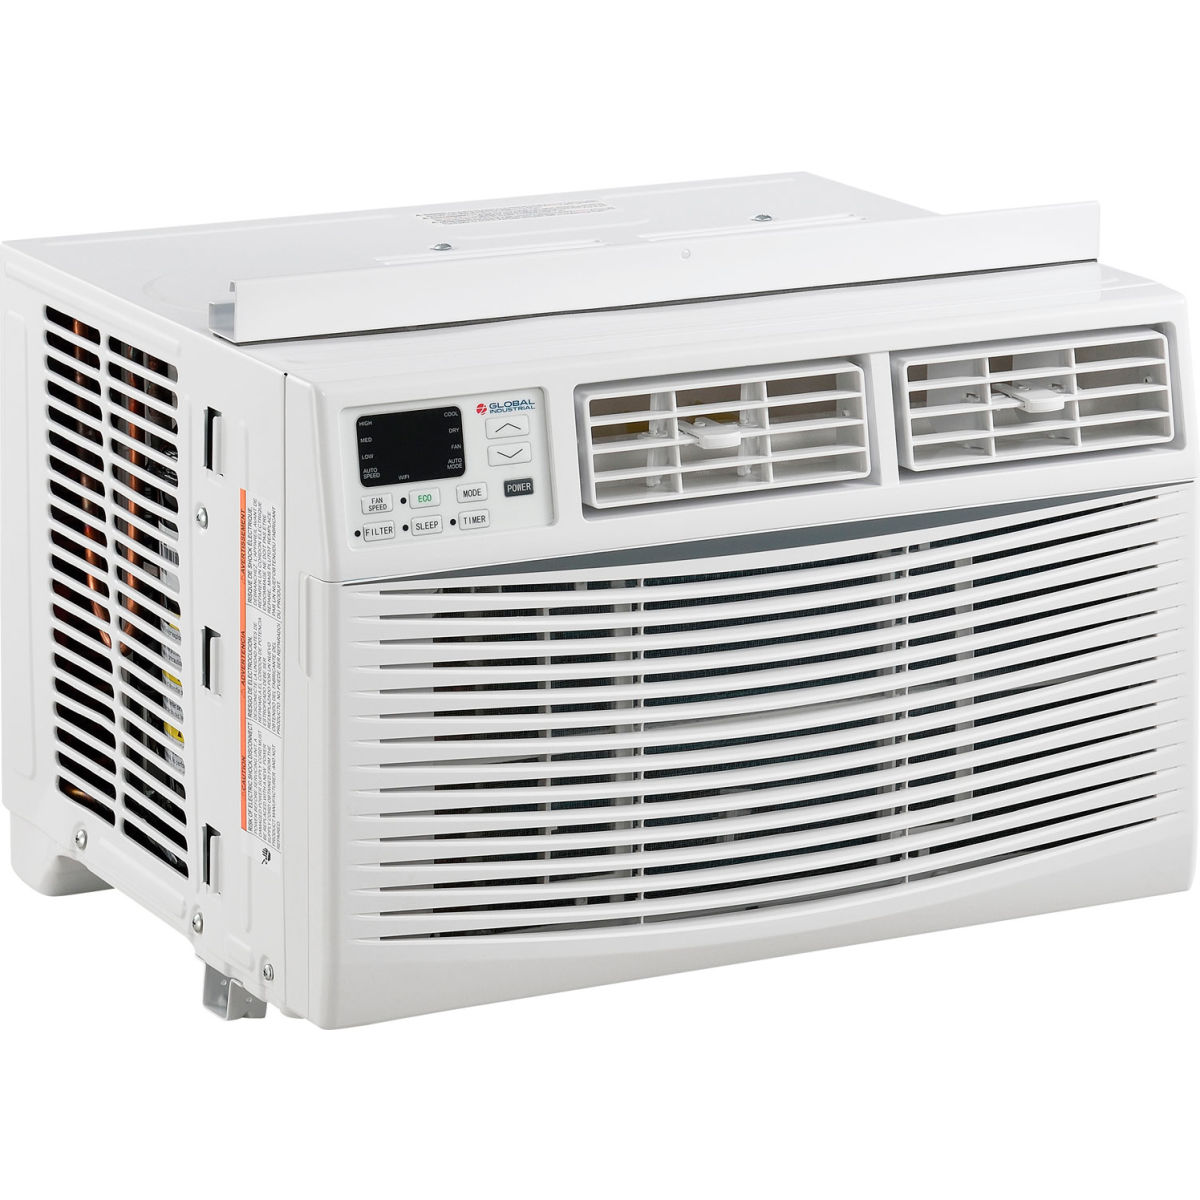 292853 8000 BTU Energy Star 115V Global Industrial Window Air Conditioner -  TCL Home Appliances